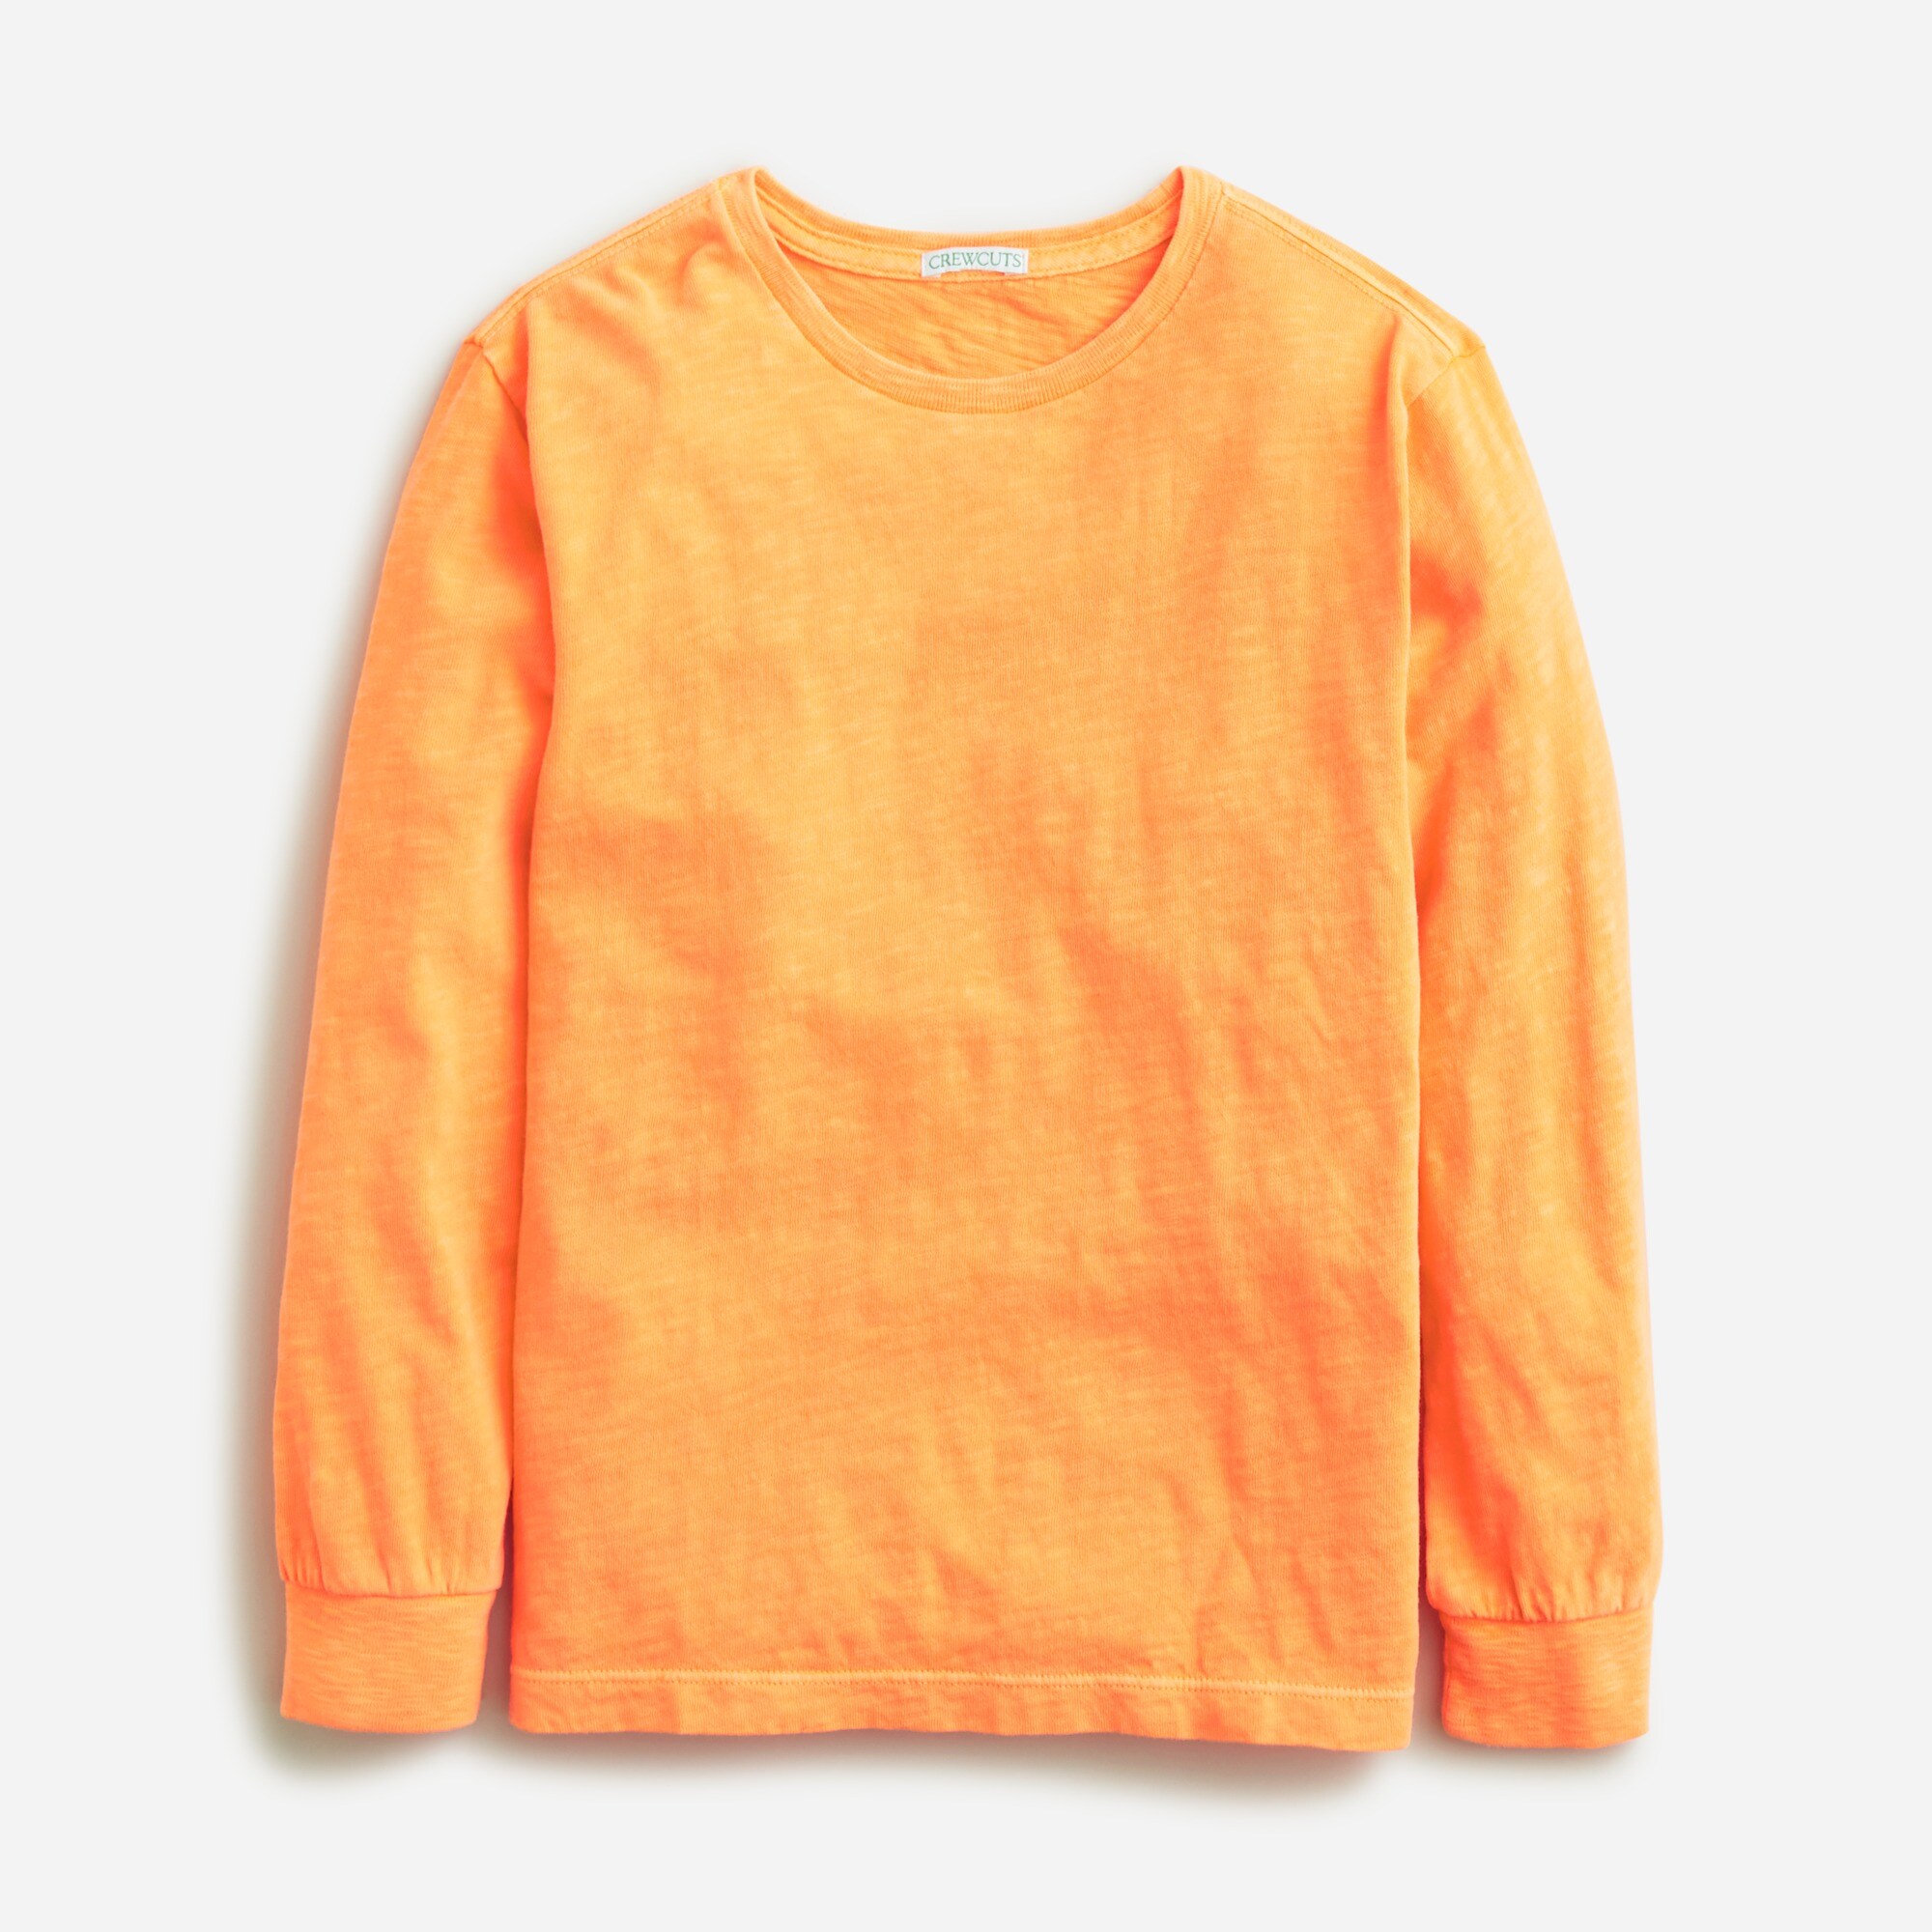  KID by crewcuts garment-dyed T-shirt